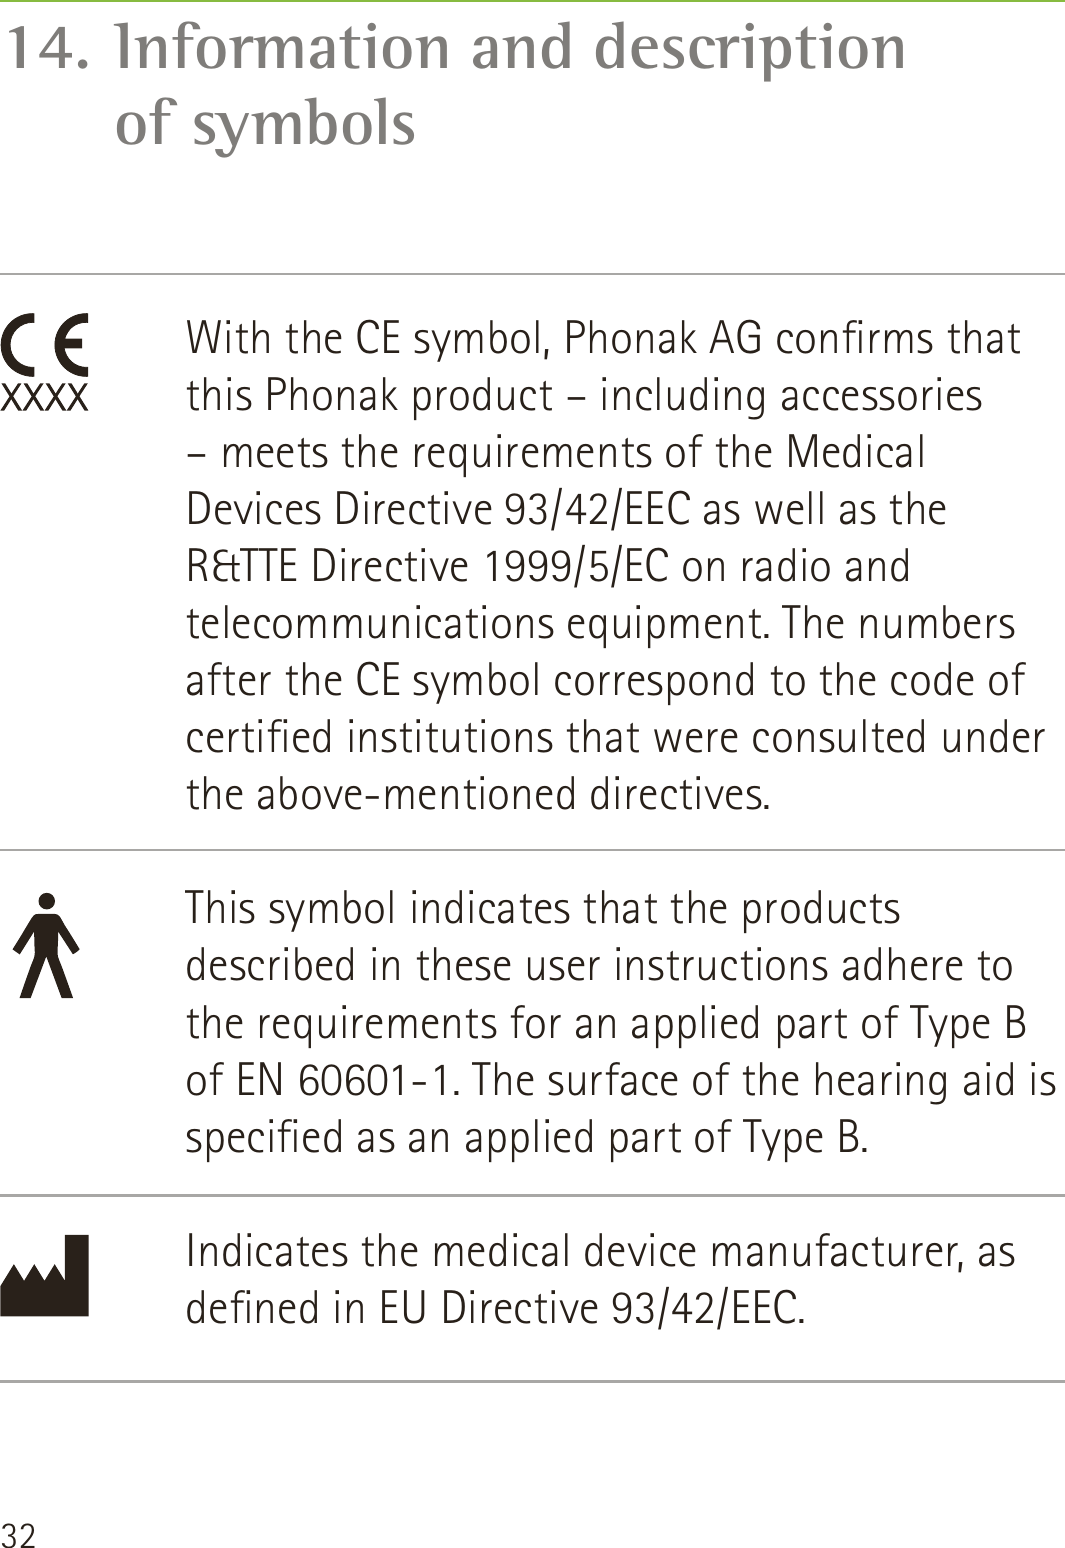 32With the CE symbol, Phonak AG conrms that this Phonak product – including accessories – meets the requirements of the Medical Devices Directive 93/42/EEC as well as the R&amp;TTE Directive 1999/5/EC on radio and telecommunications equipment. The numbers after the CE symbol correspond to the code of certied institutions that were consulted under the above-mentioned directives.This symbol indicates that the products described in these user instructions adhere to the requirements for an applied part of Type B of EN 60601-1. The surface of the hearing aid is specied as an applied part of Type B.Indicates the medical device manufacturer, as dened in EU Directive 93/42/EEC.14.  Information and description  of symbols